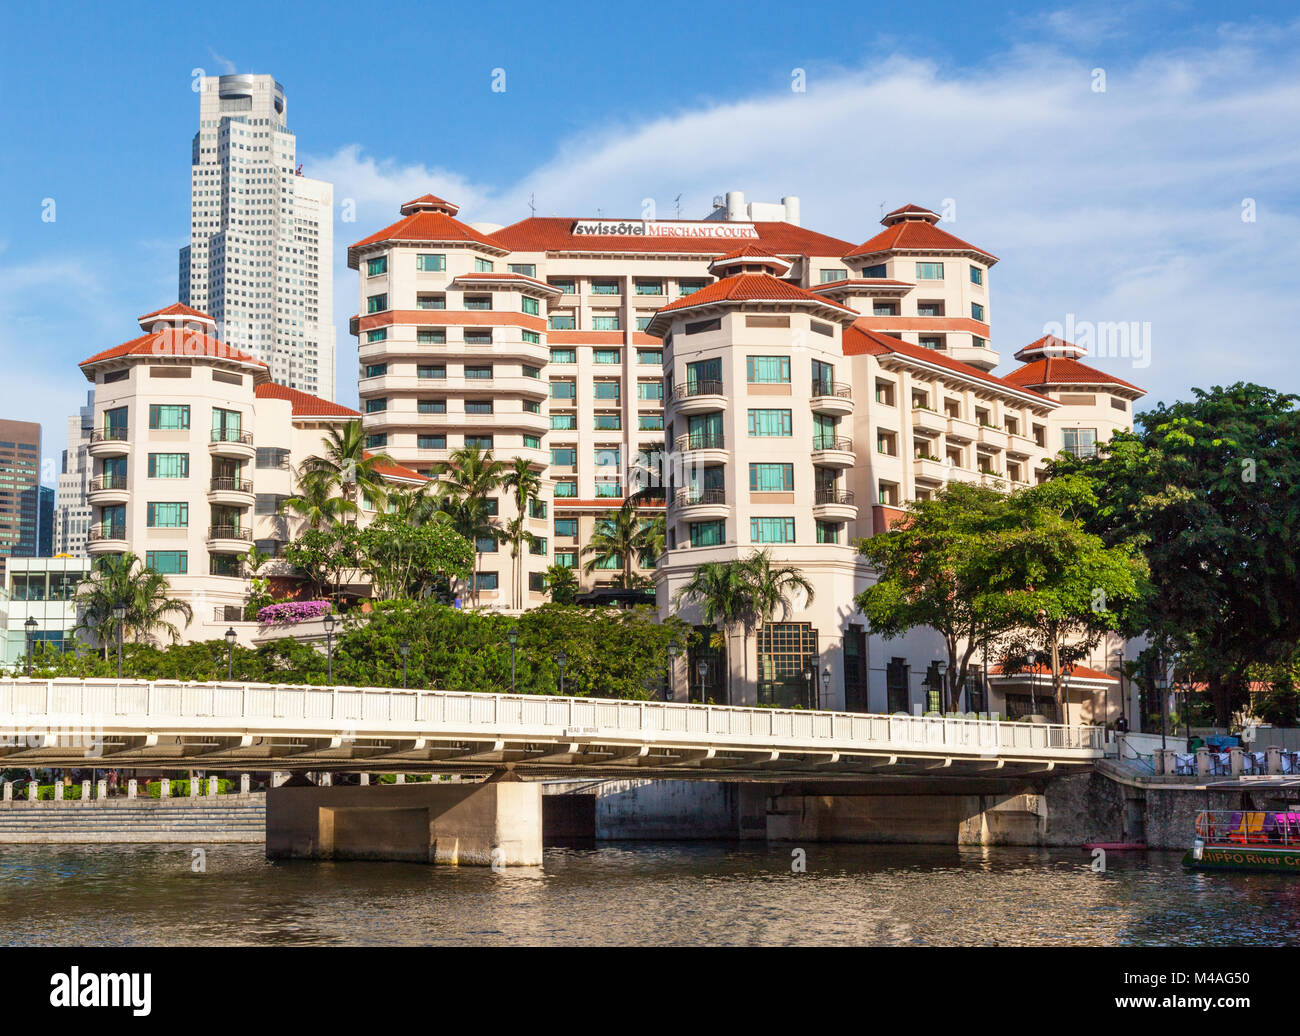 A view of the Swissotel Merchant Court Hotel in Singapore, with a bridge and the Singapore River in the foreground. Stock Photo